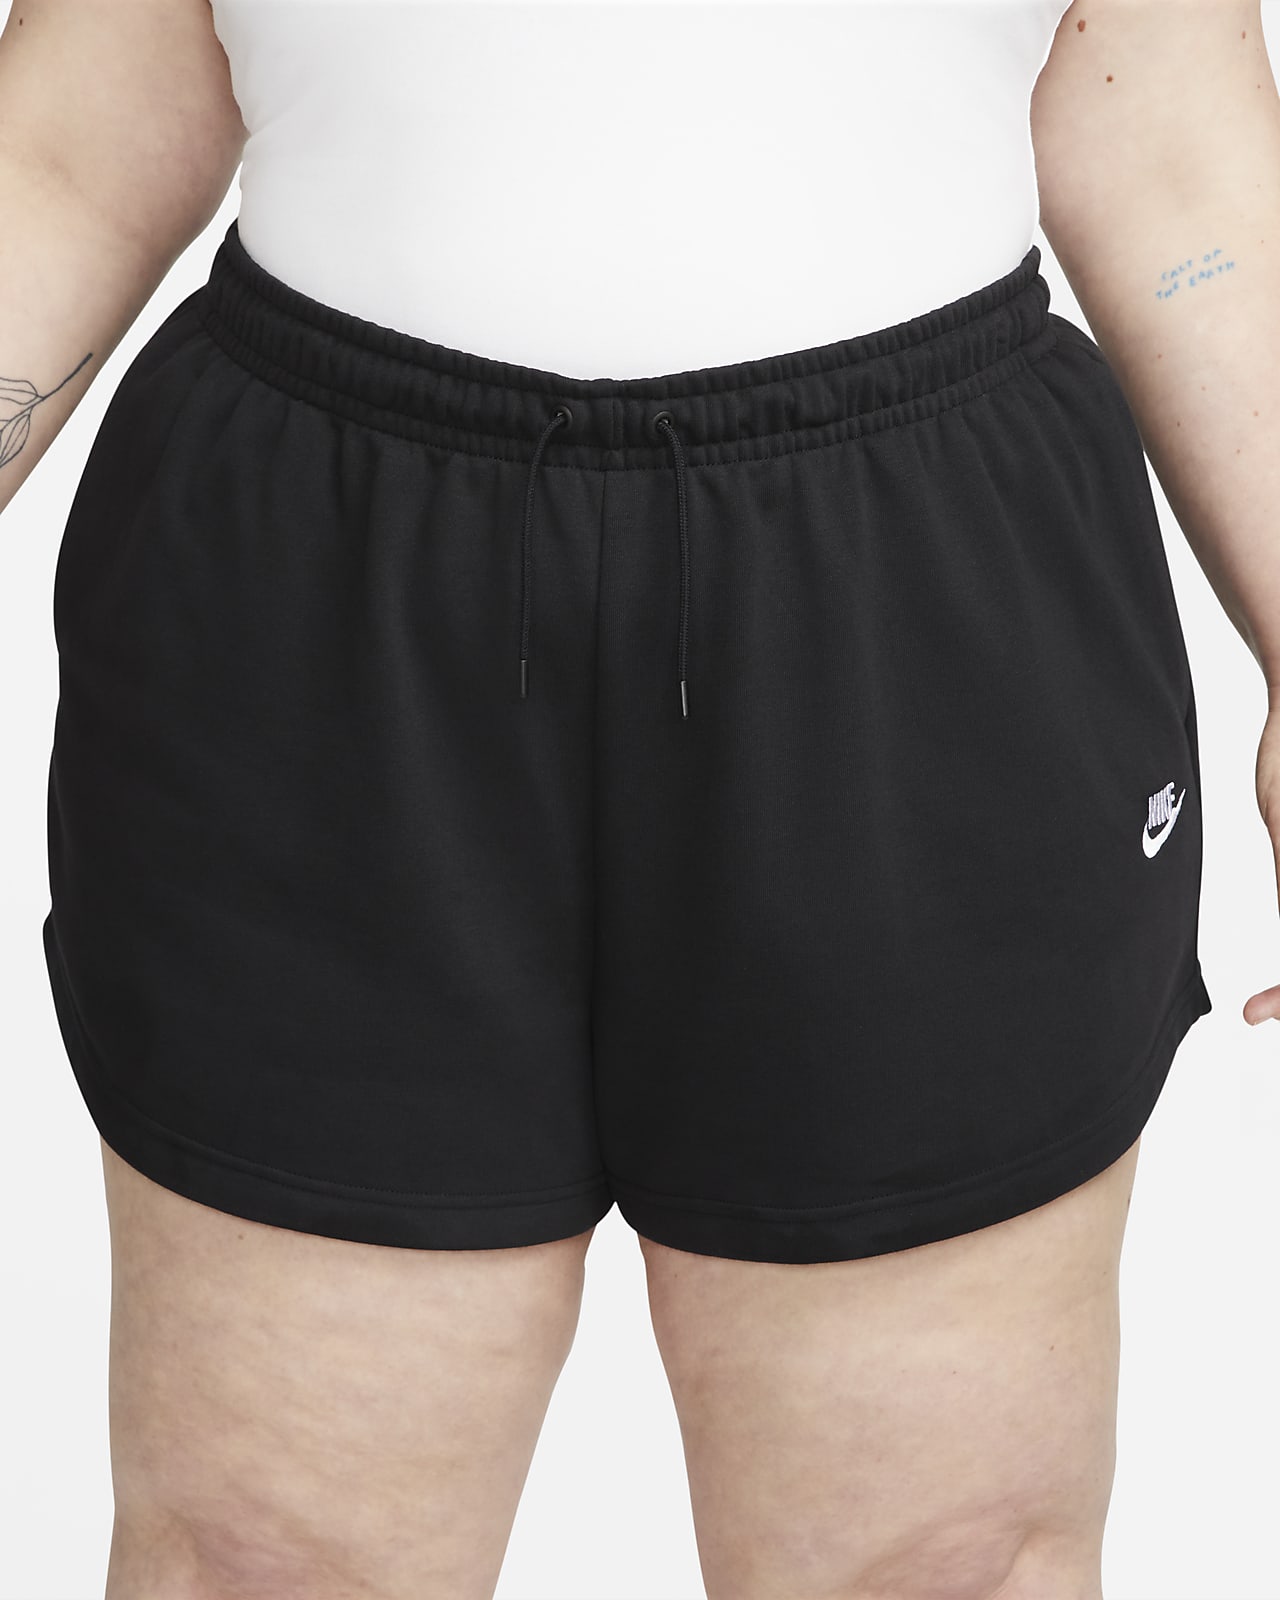 Girl Next Door Shorts- Black – Ashley Snell Collection, 46% OFF